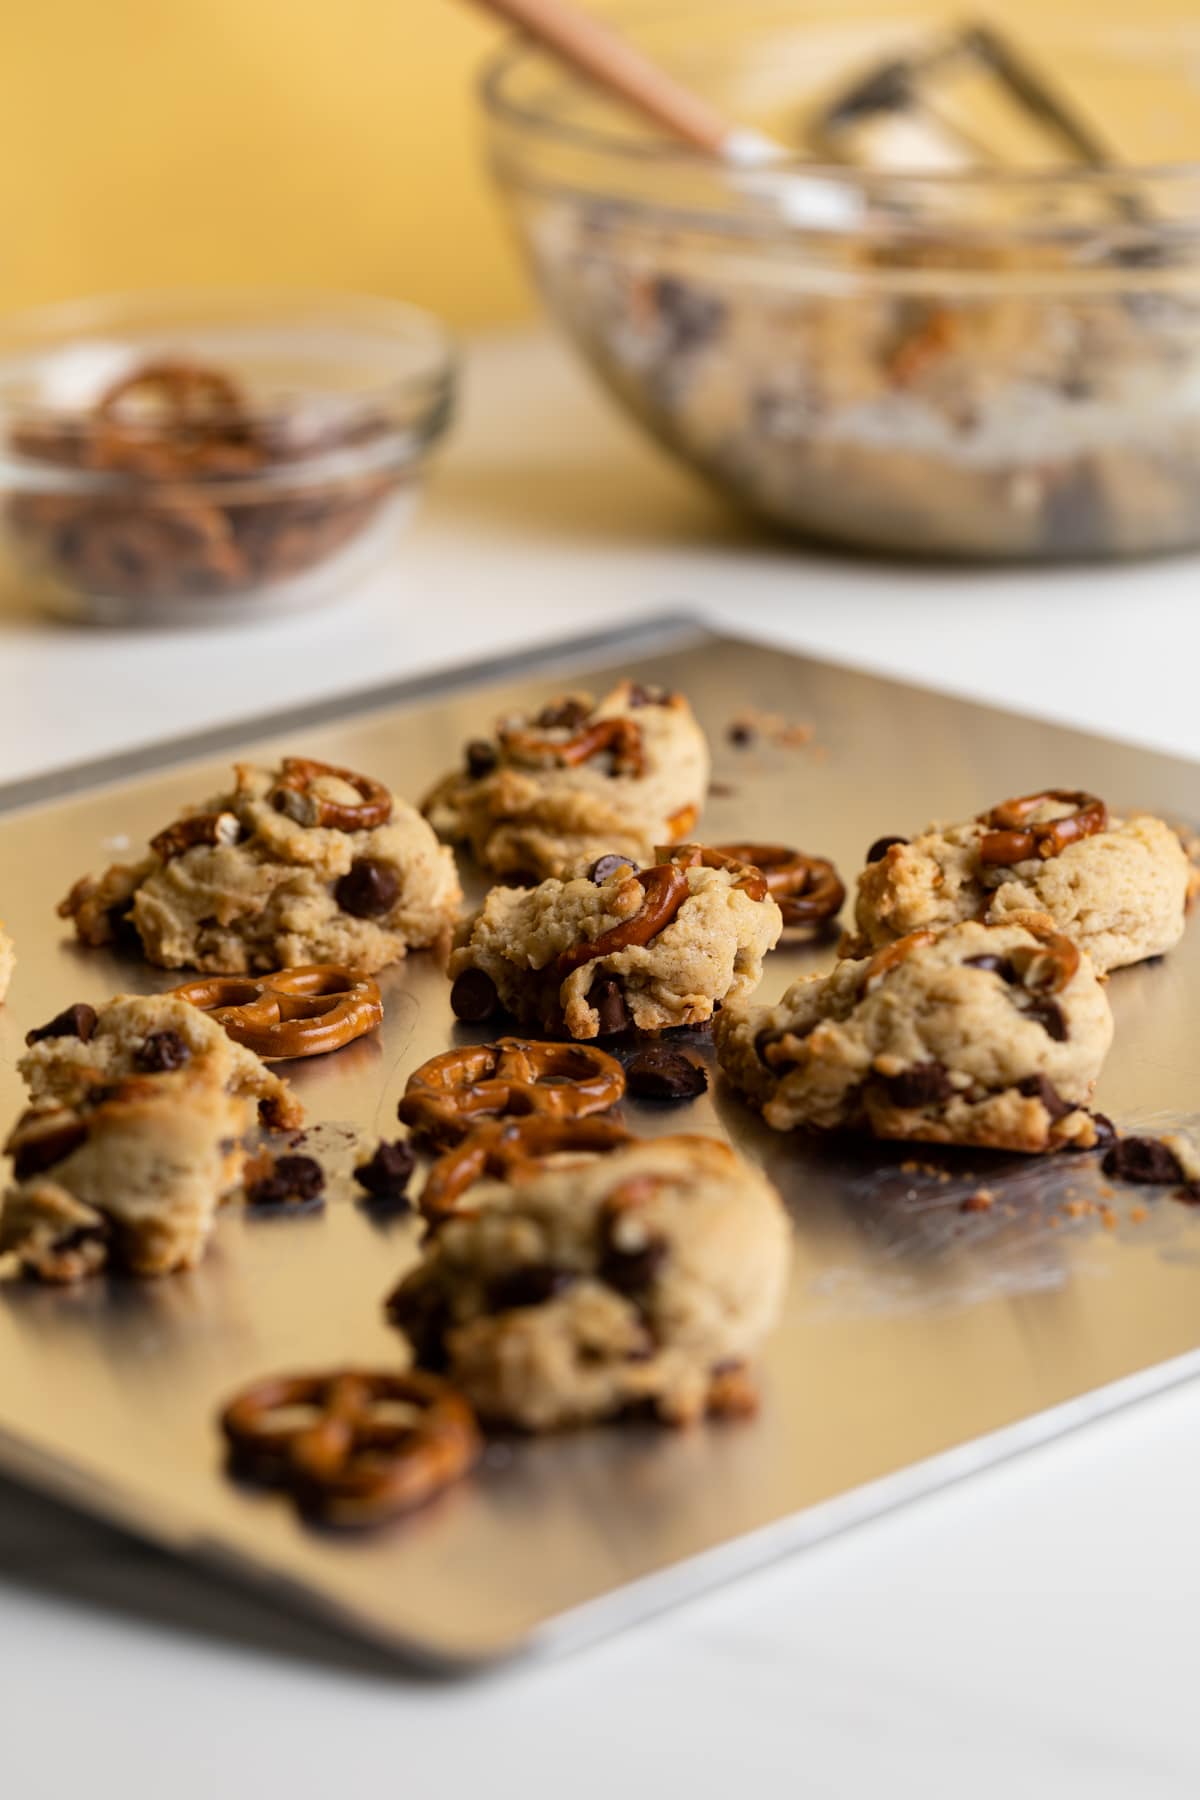 Chunky Vegan Chocolate Chip and Pretzel Cookies on a baking sheet.